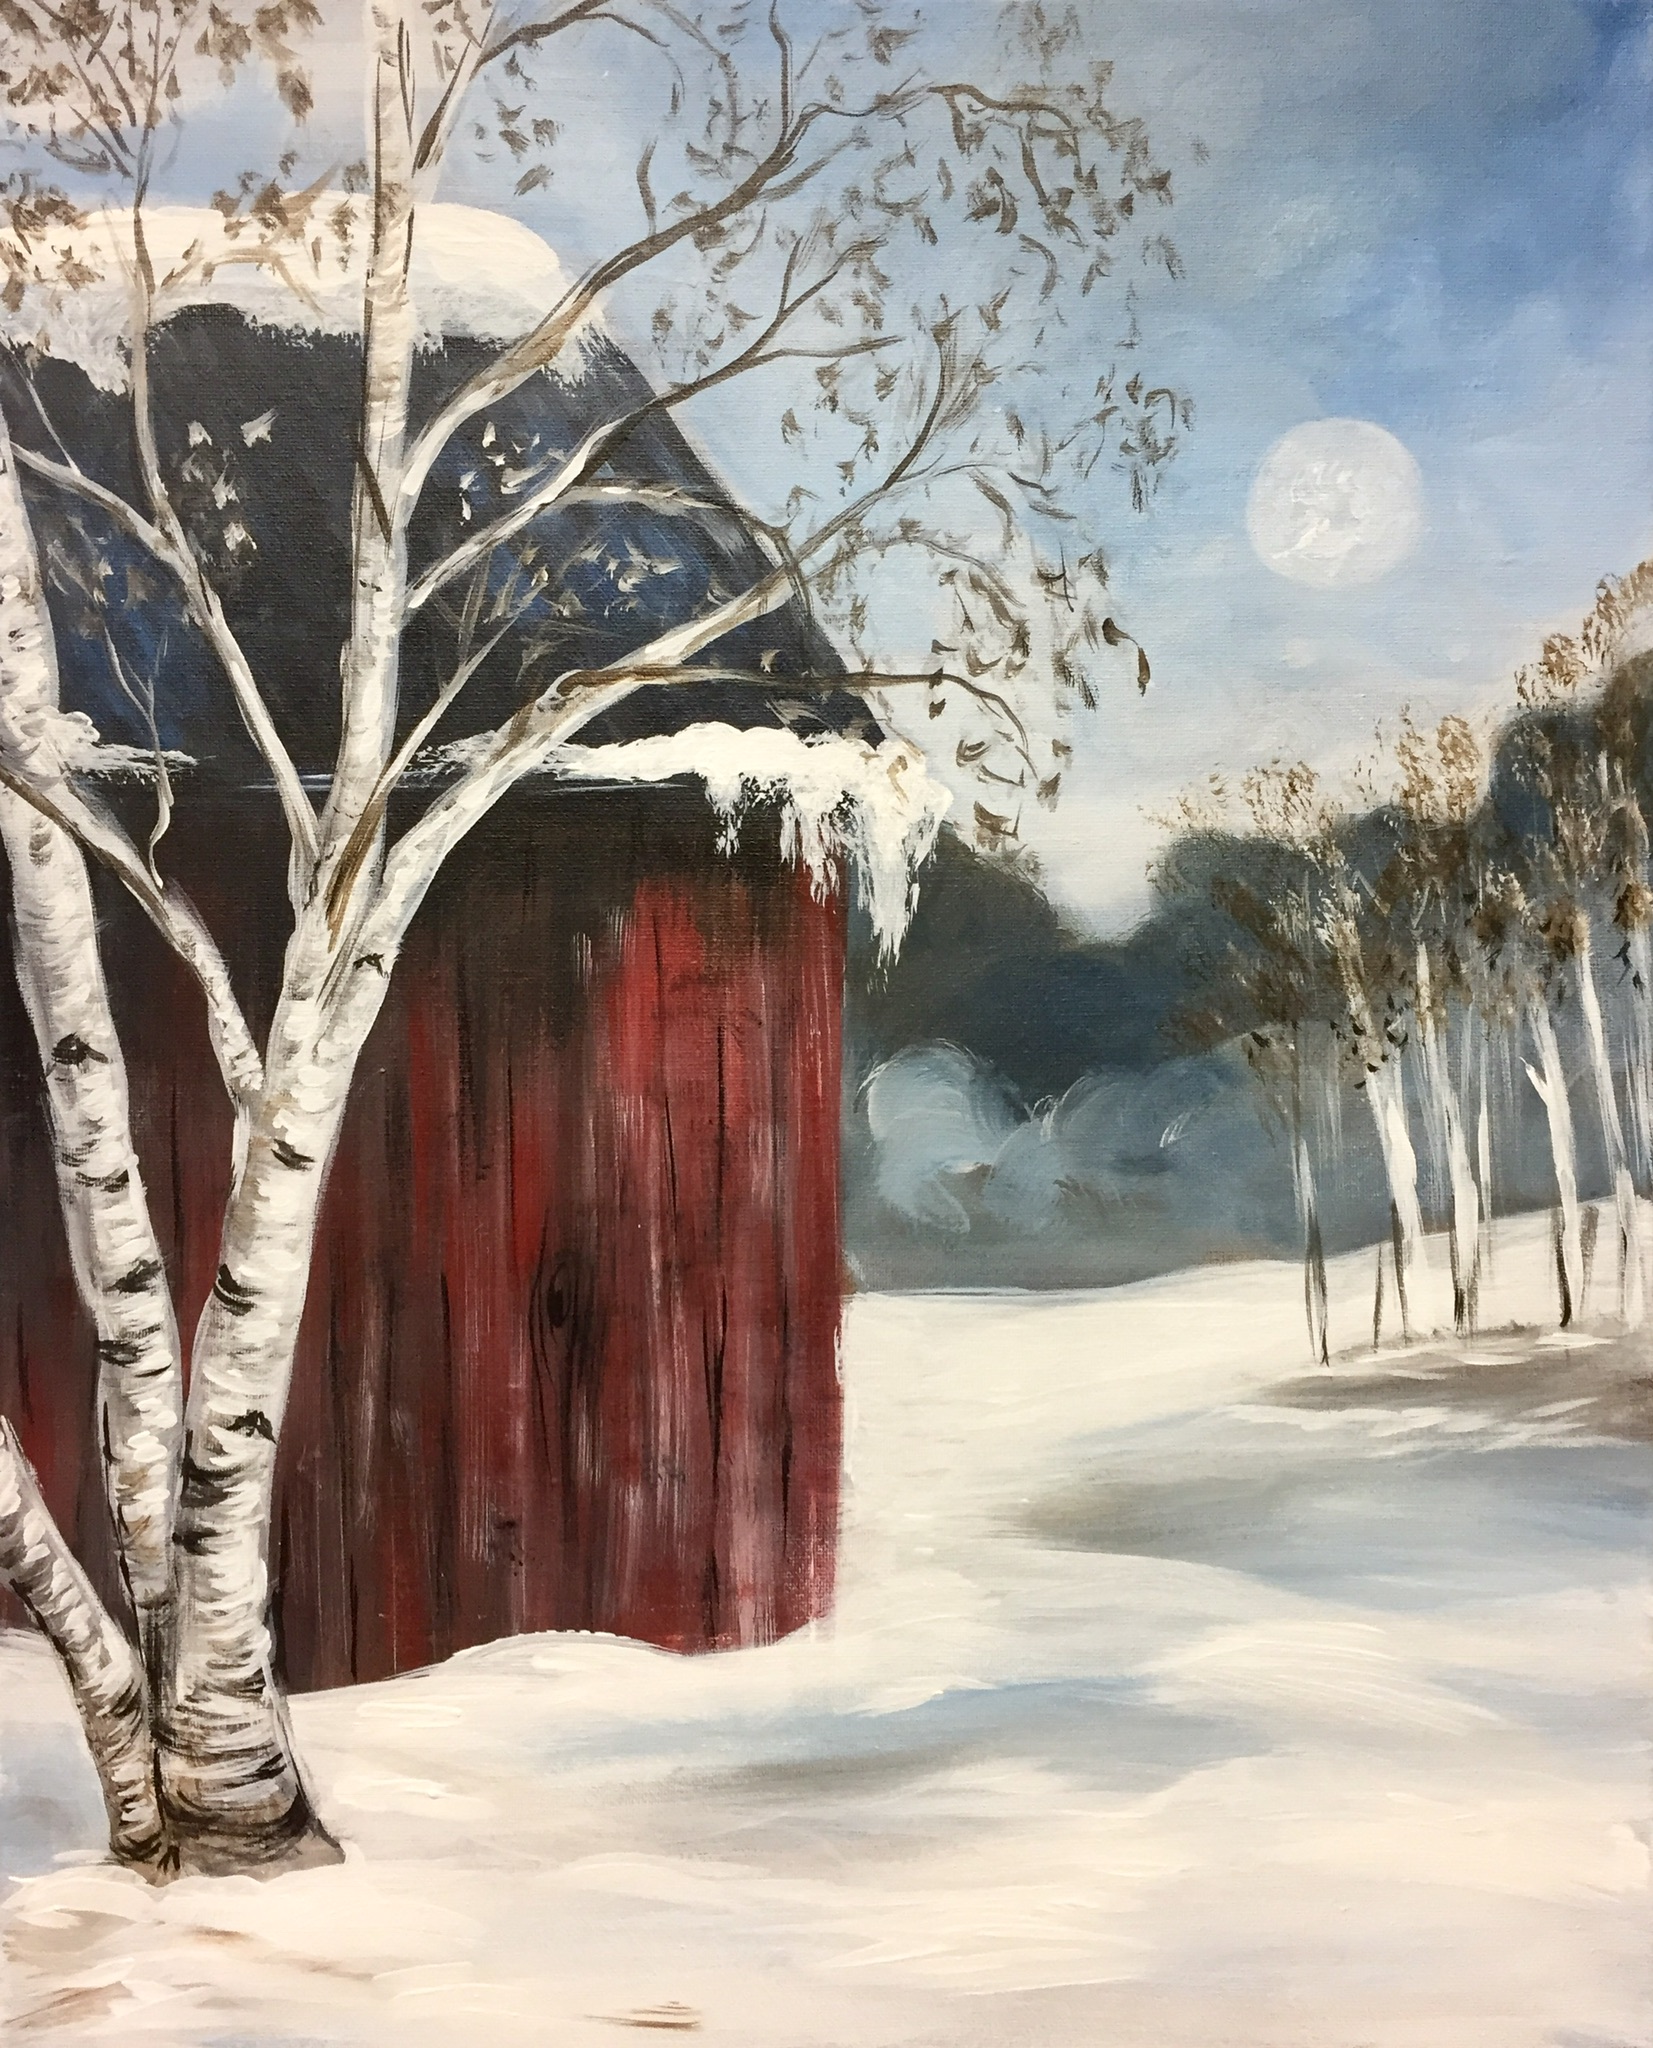 WINTER IN THE COUNTRY @ Backyard Steak pit | Art Rave Inc.